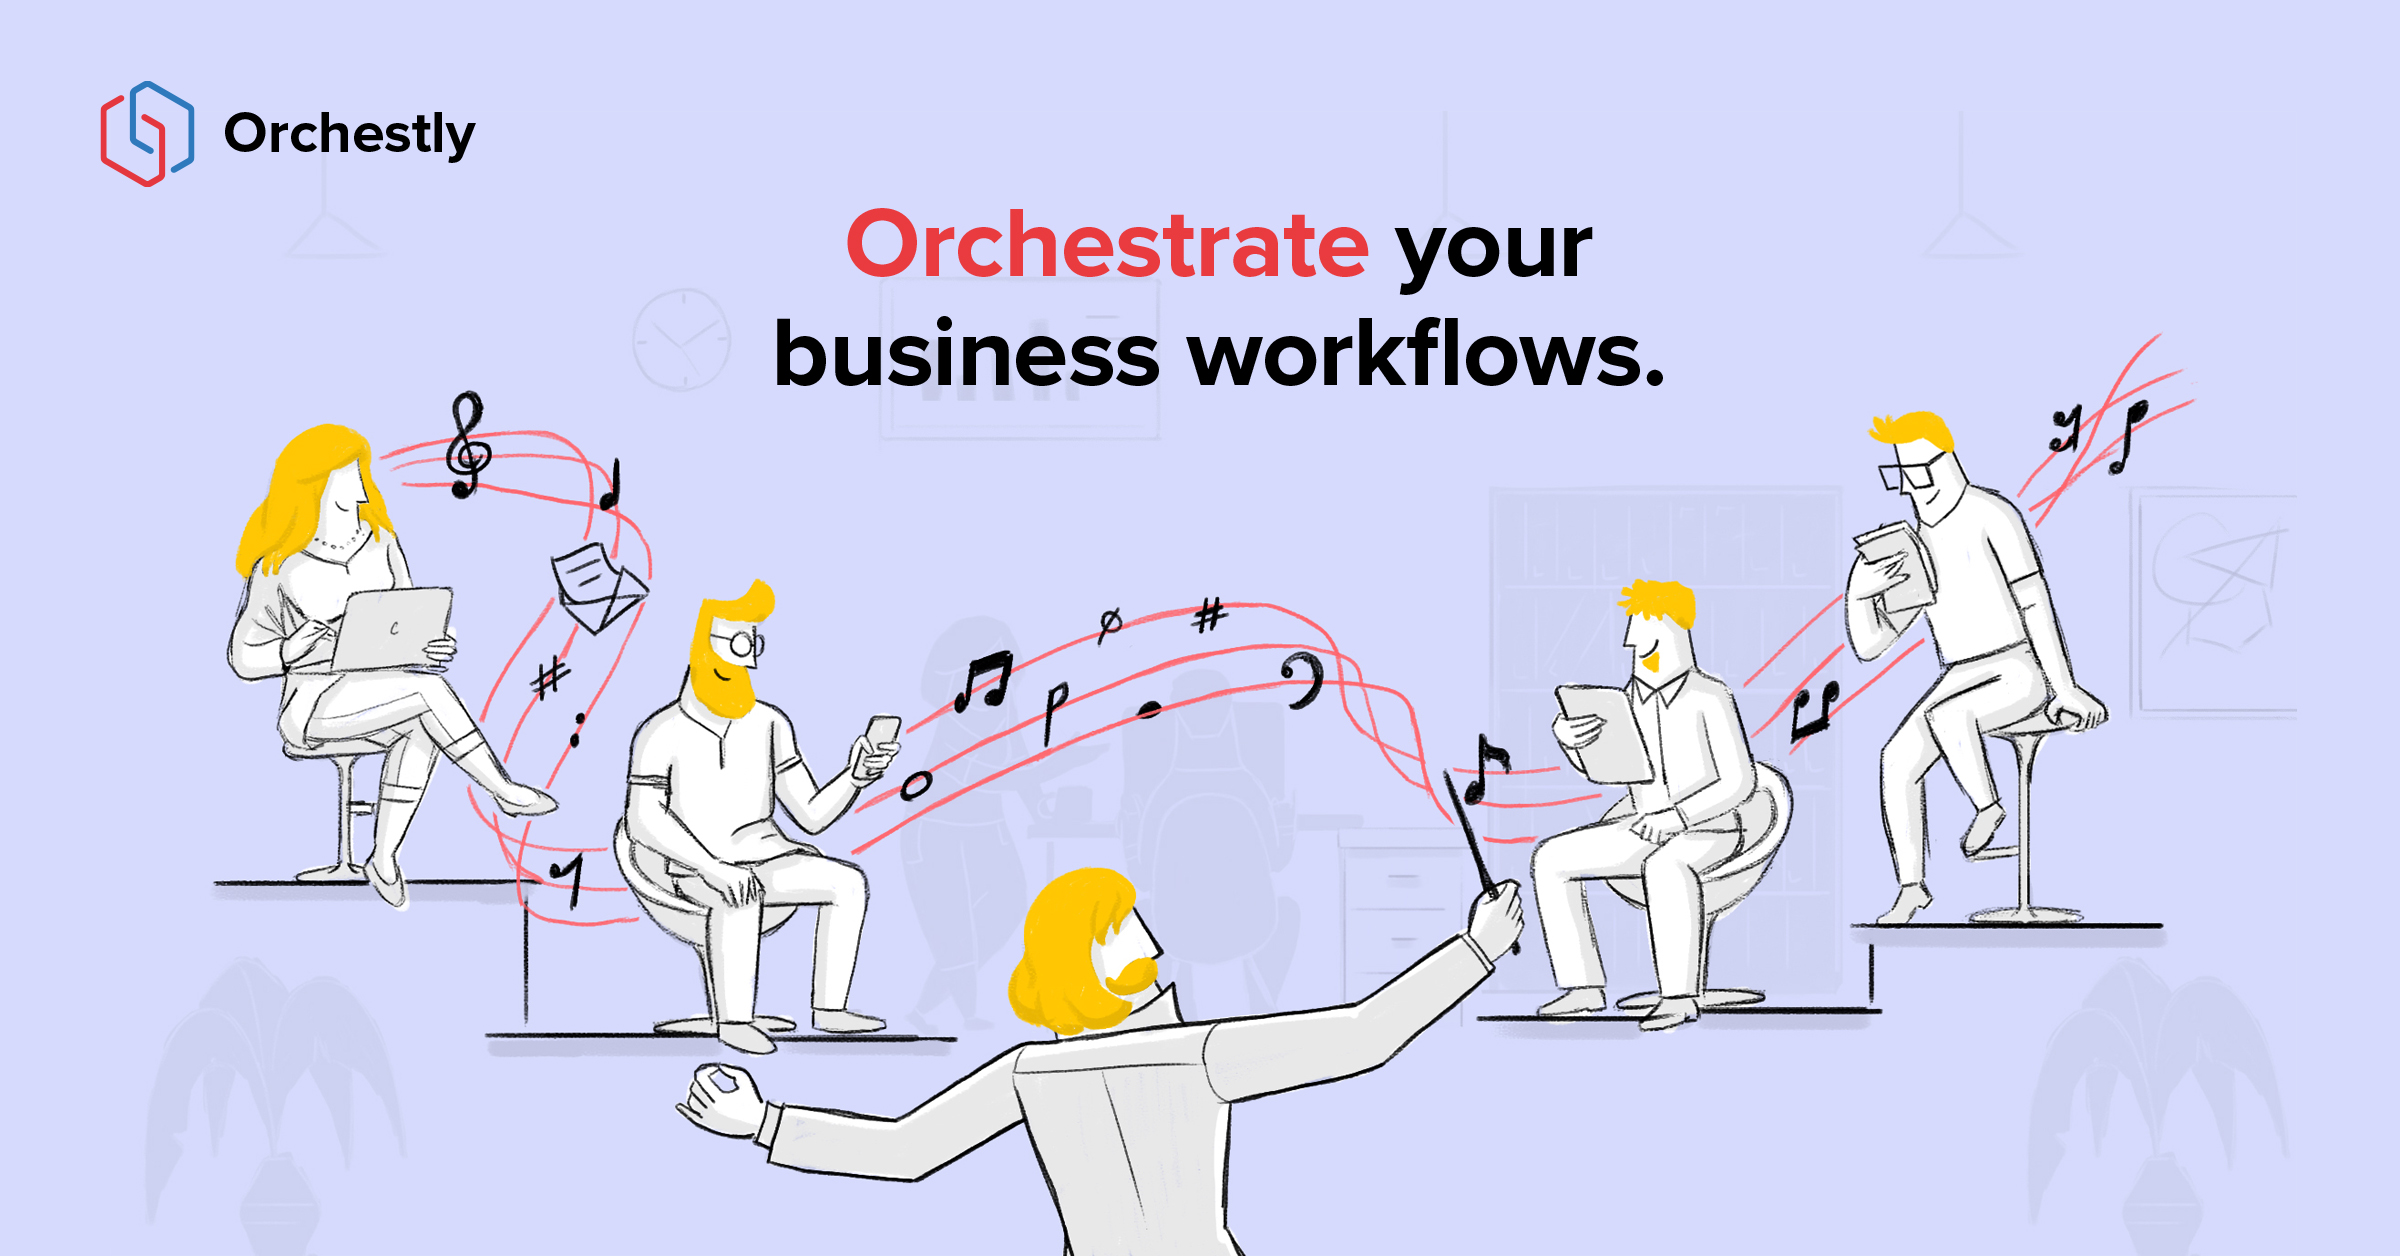 Announcing Orchestly—orchestrate your business workflows